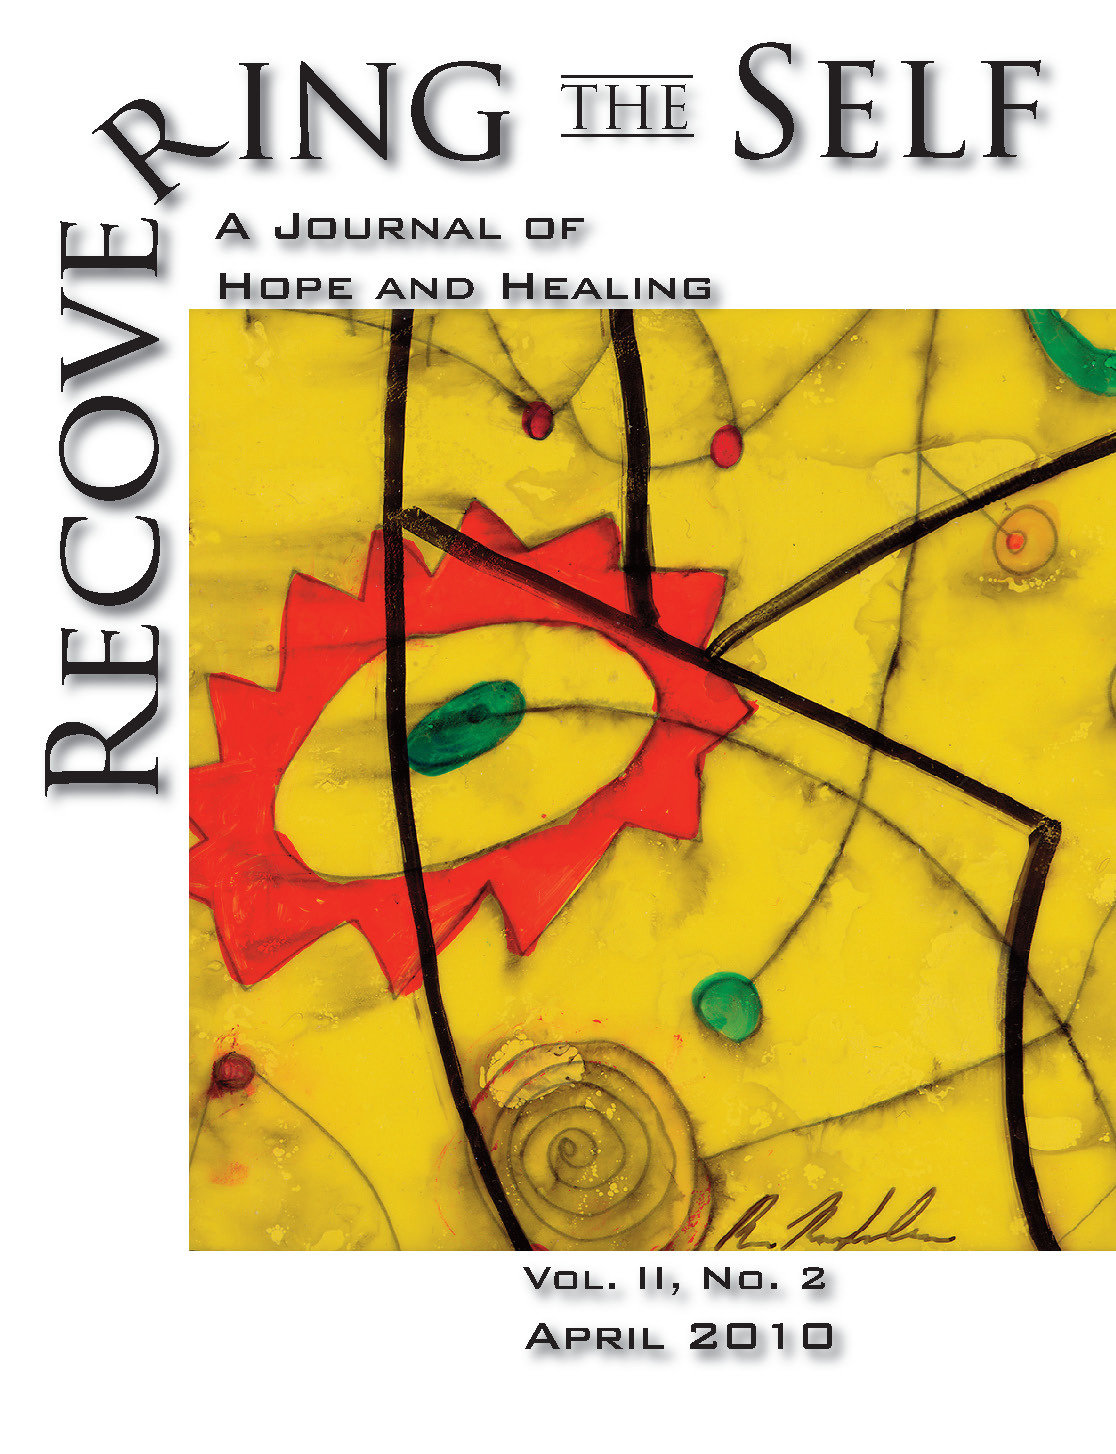 Recovering The Self: A Journal of Hope and Healing (Vol. II, No. 2)